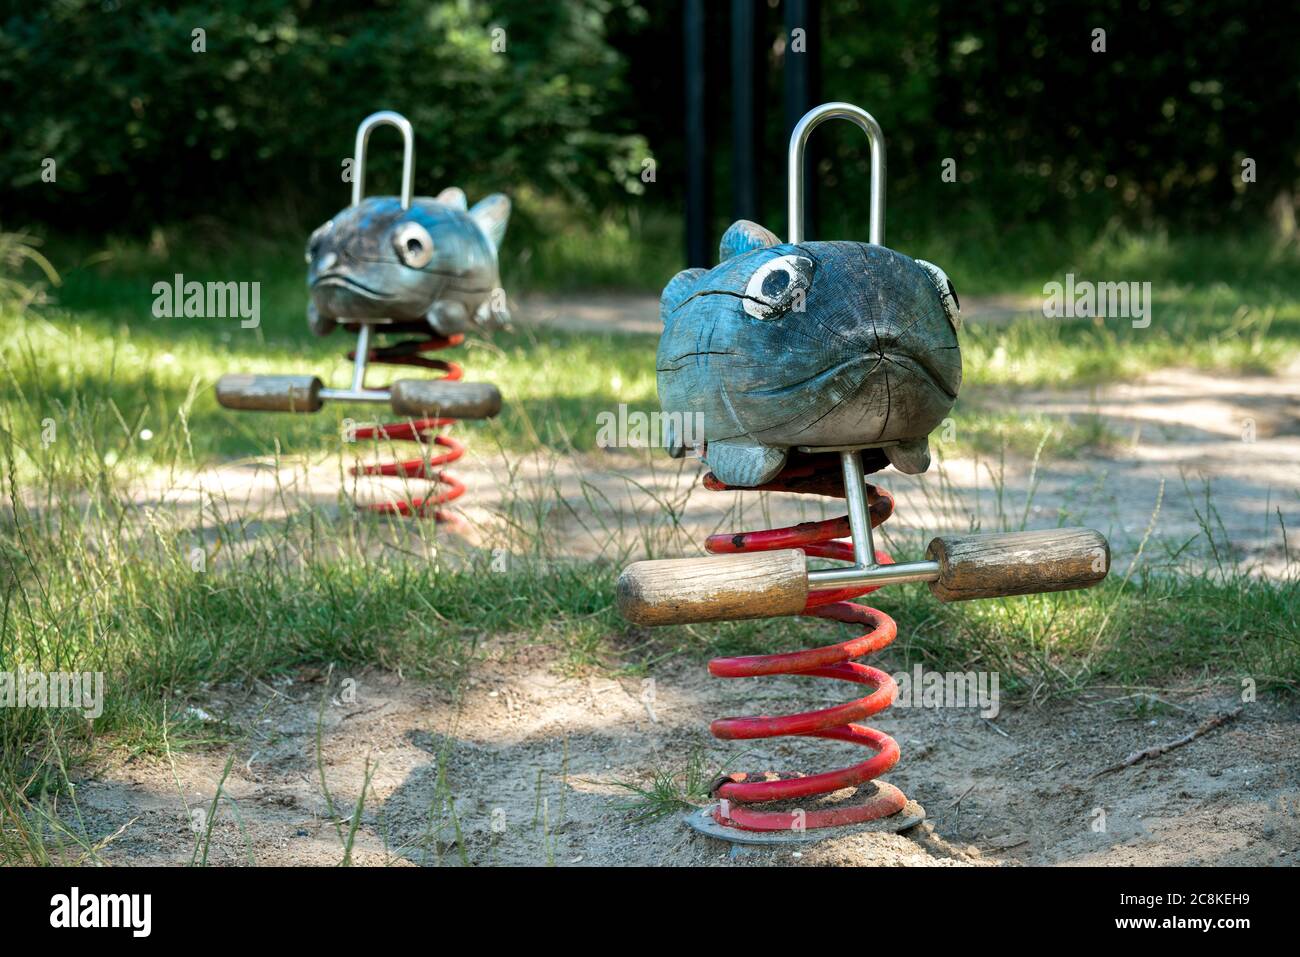 Wooden hand crafted fish spring rocker in a playground Stock Photo